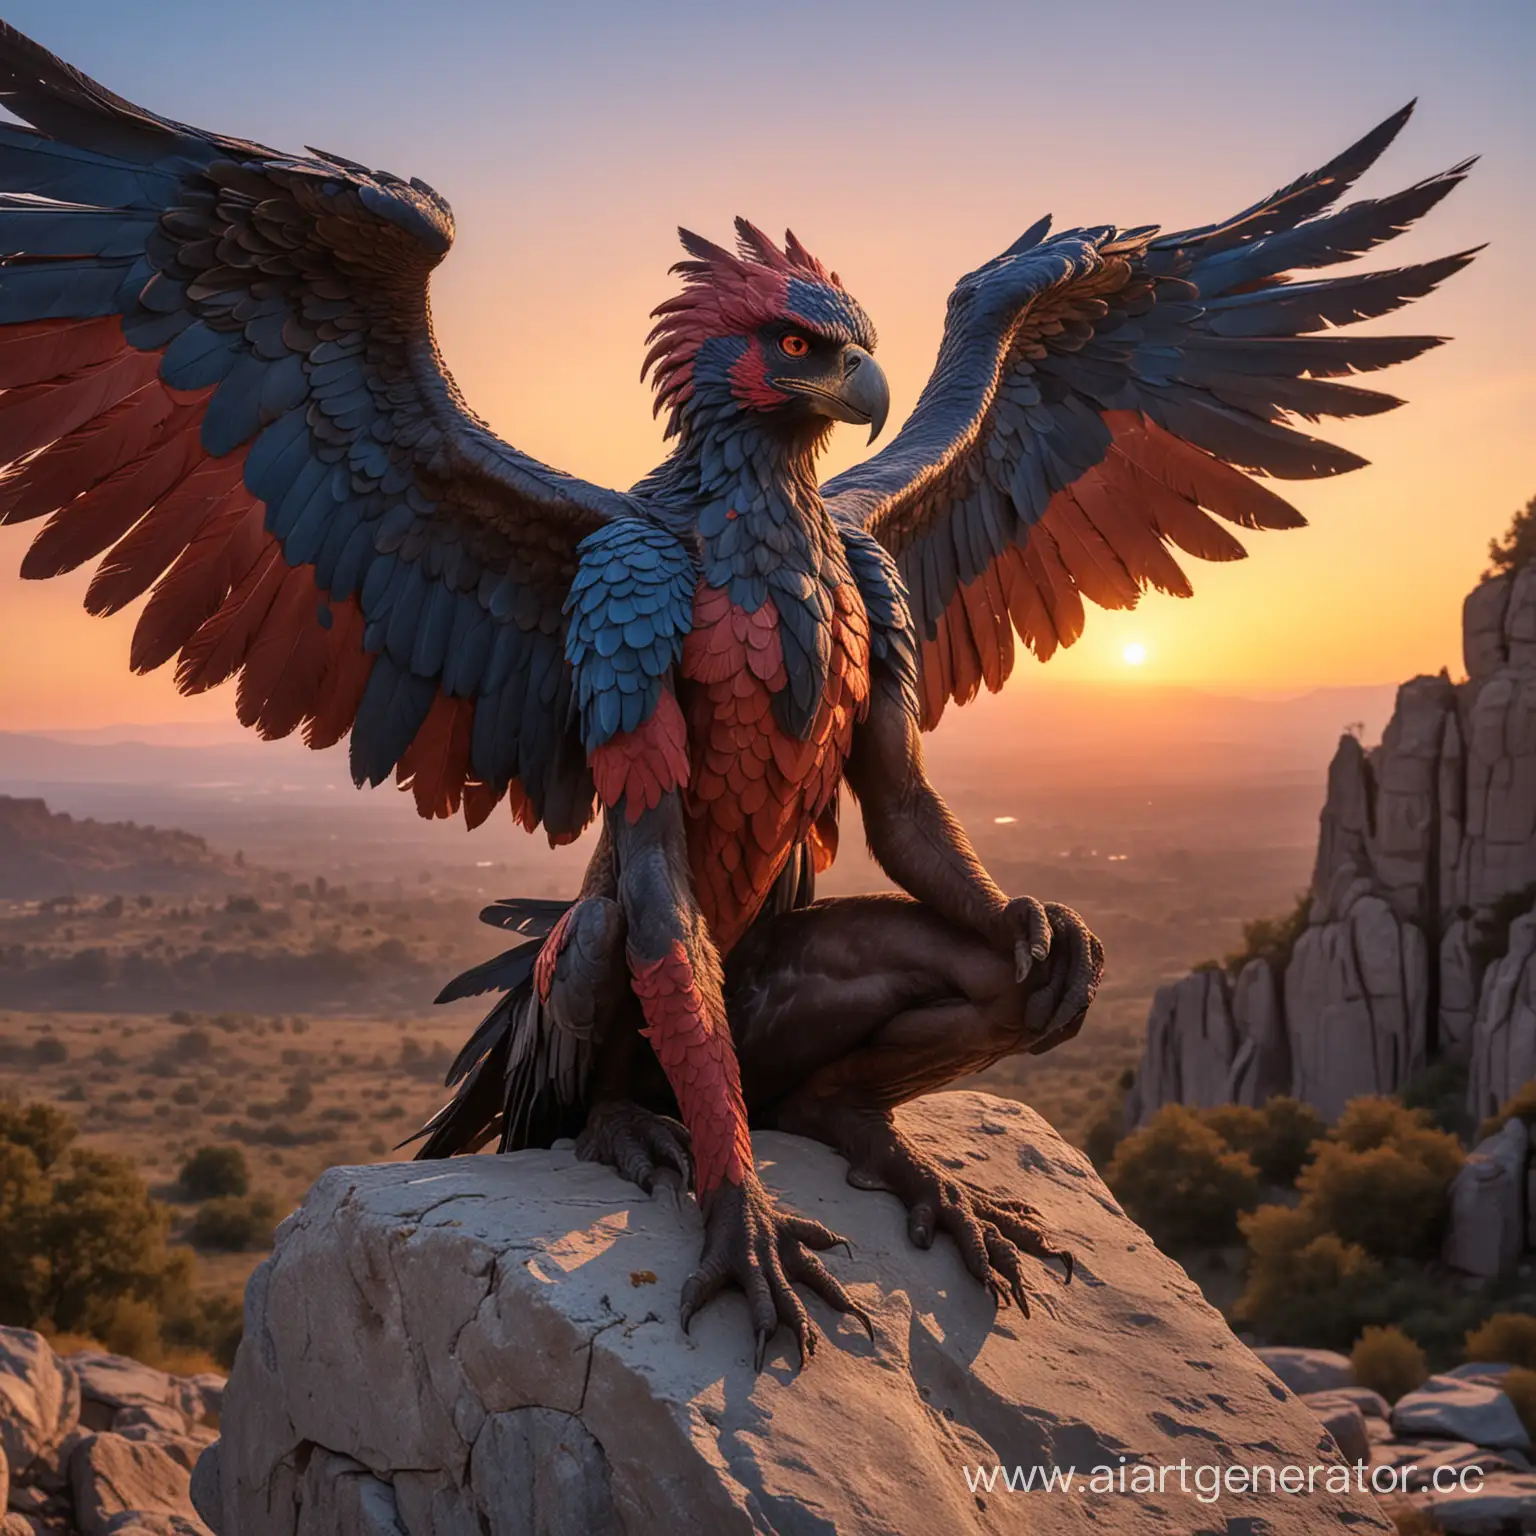 Cunning-Harpy-Man-Perched-on-Stone-at-Sunset